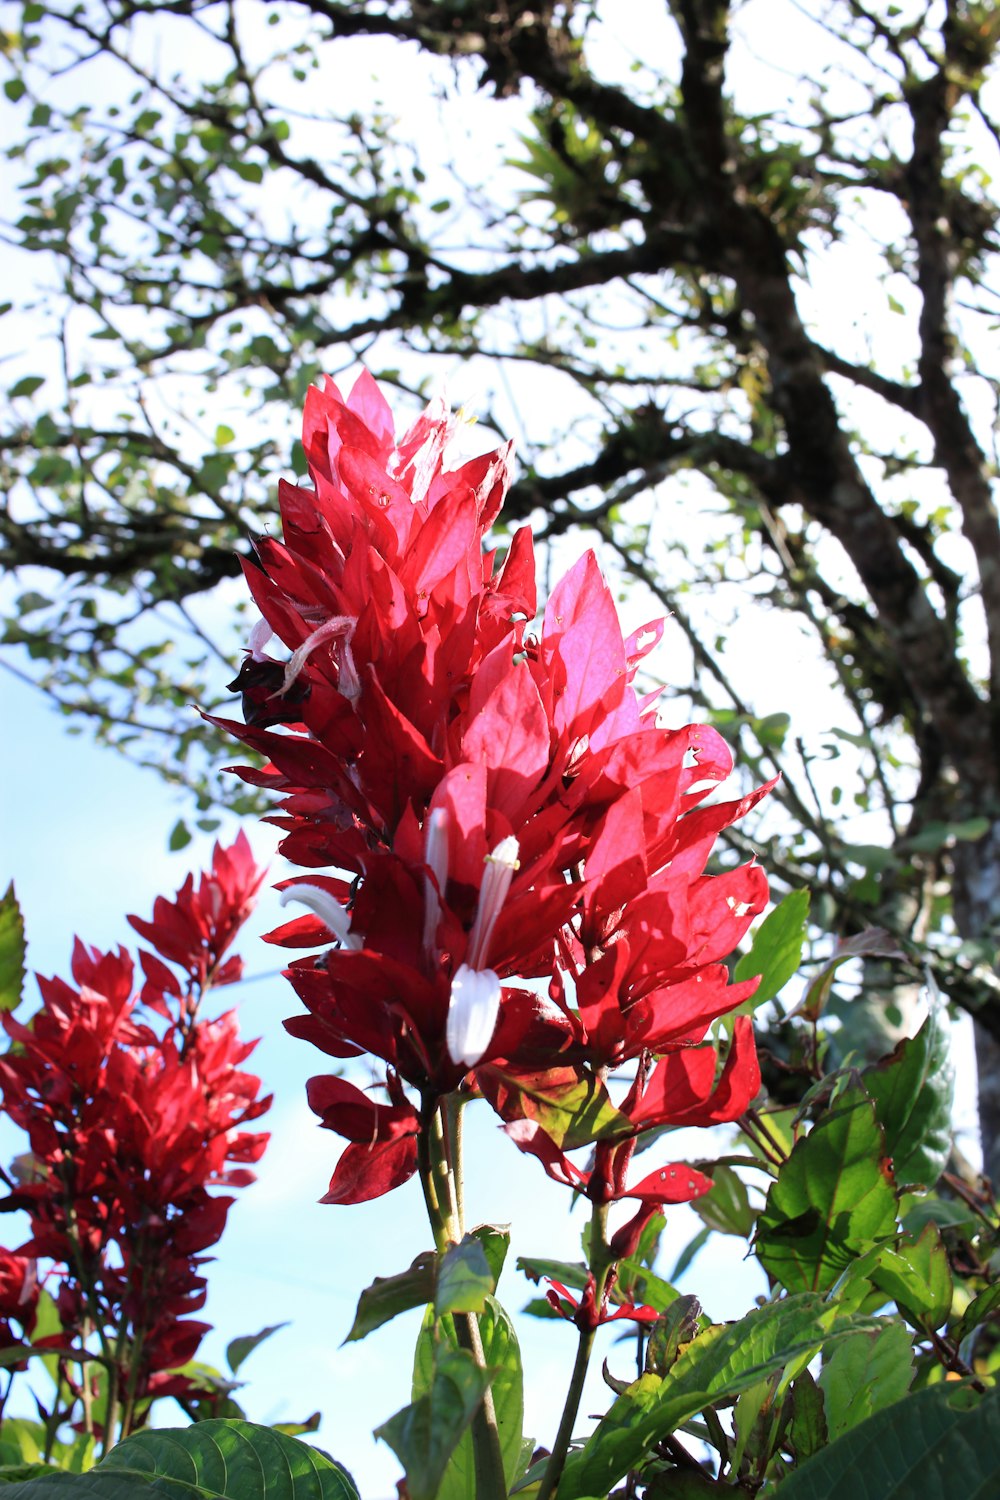 a close up of a red flower near a tree